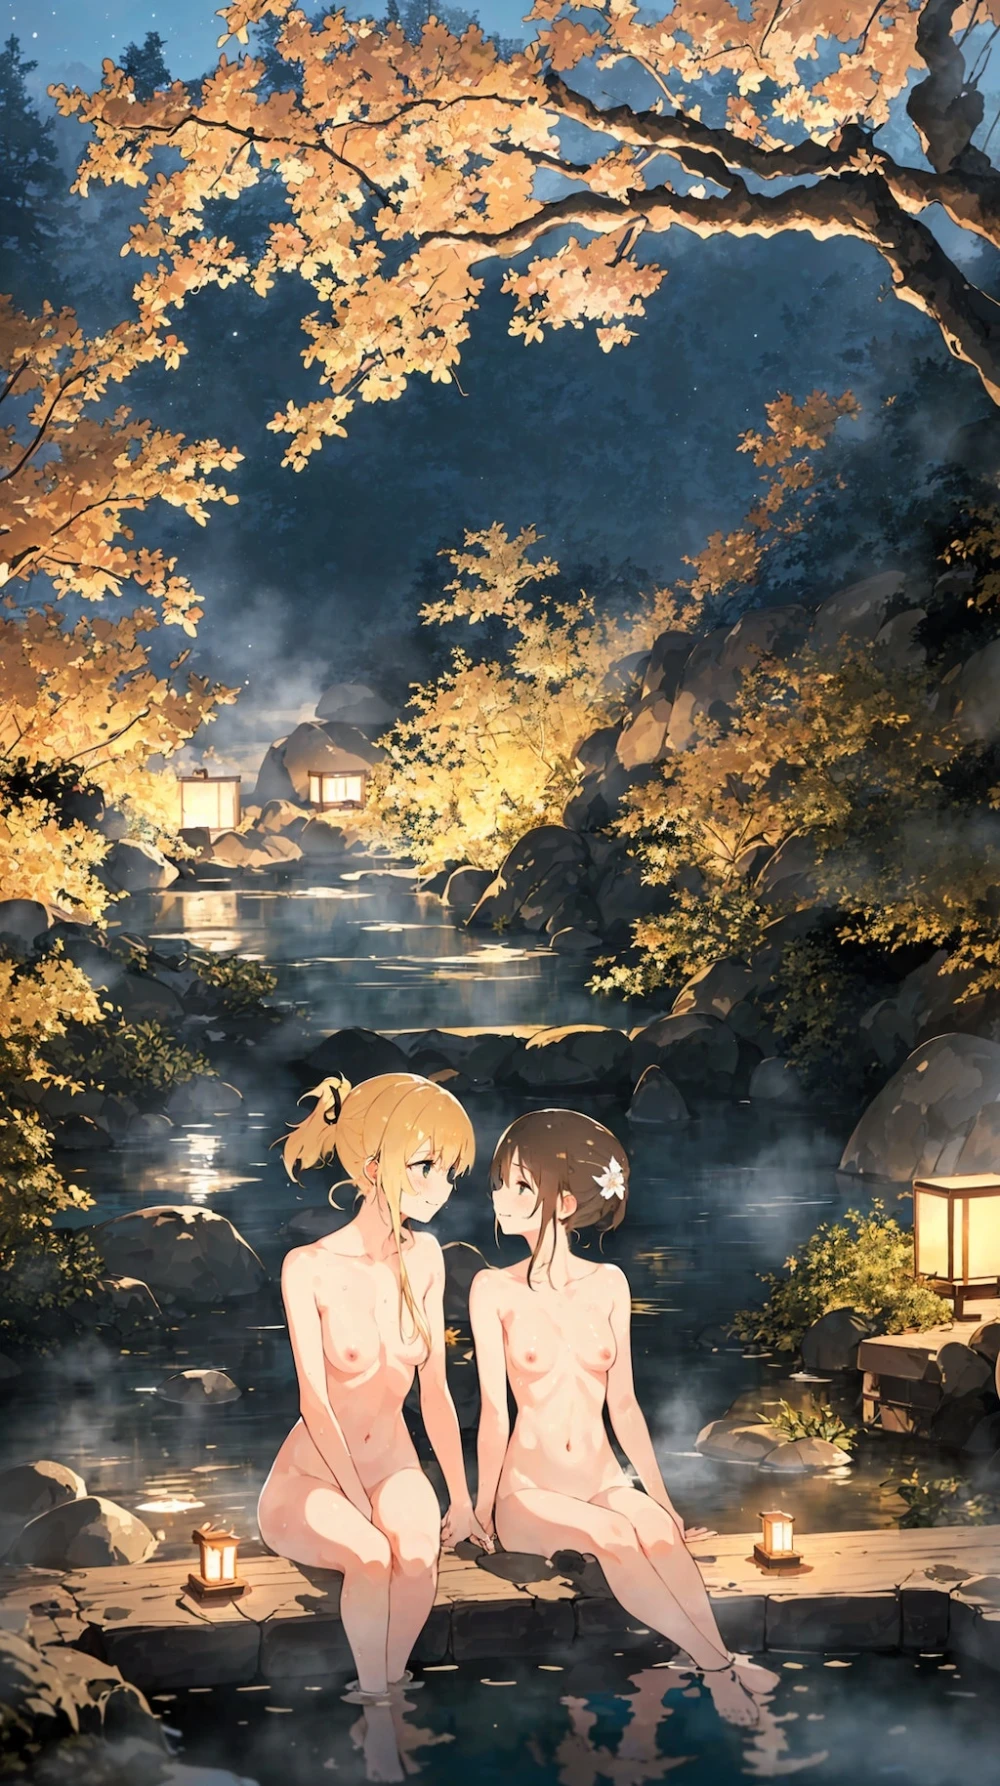 onsen-anime-style-adults-only-2-22